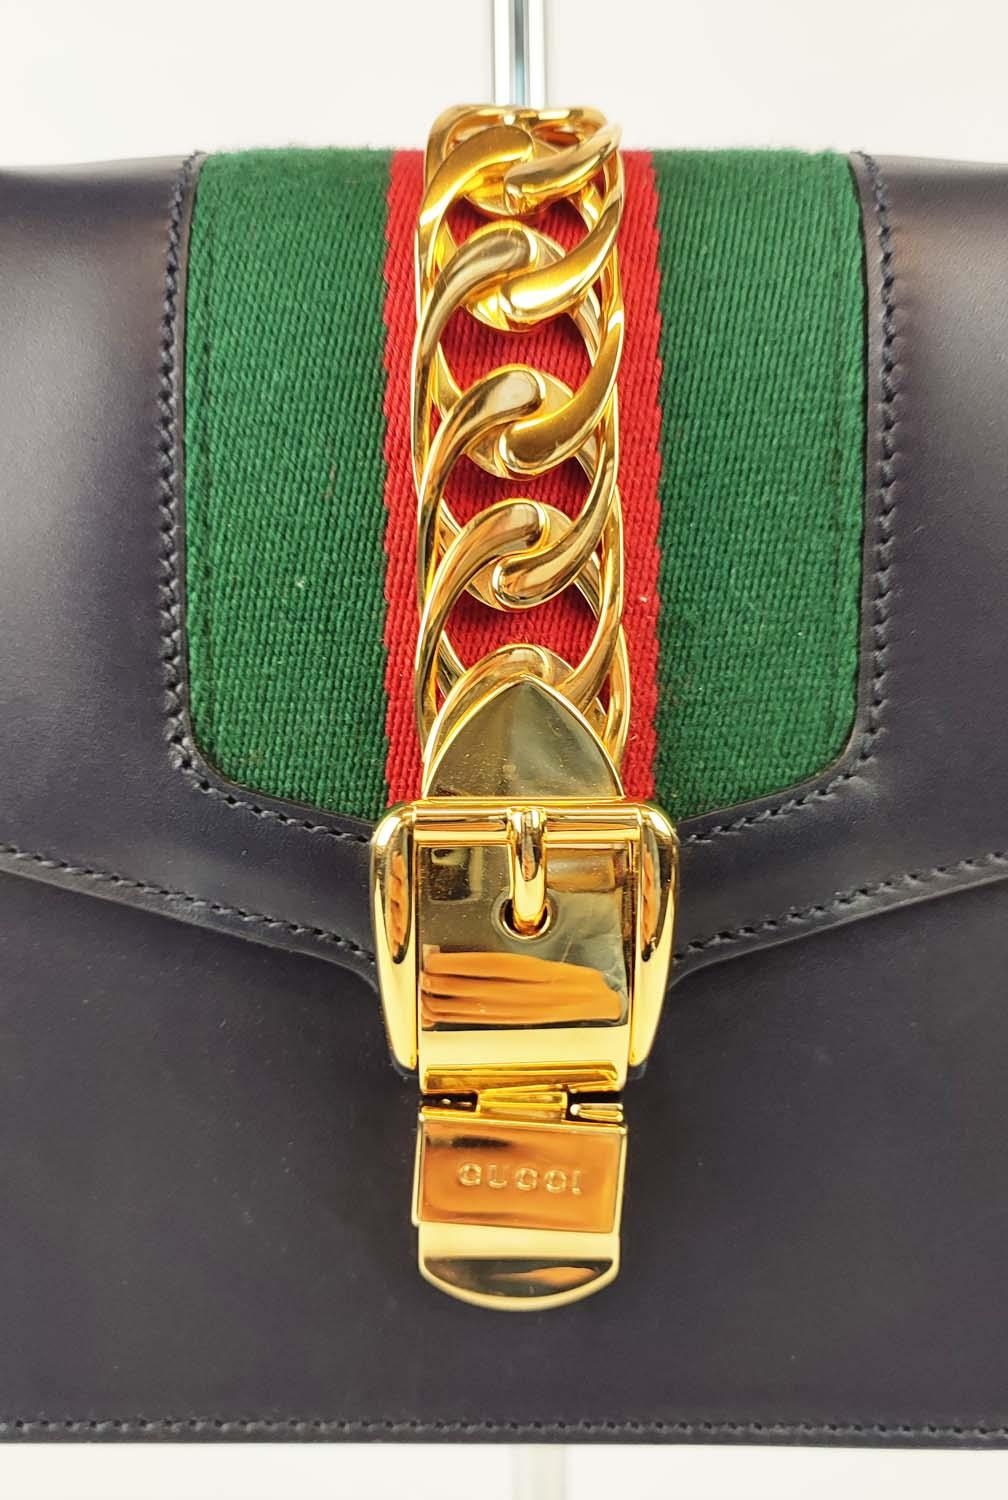 GUCCI SYLVIE SHOULDER BAG, flap closure, blue leather with iconic green and red web detailing, - Image 2 of 9